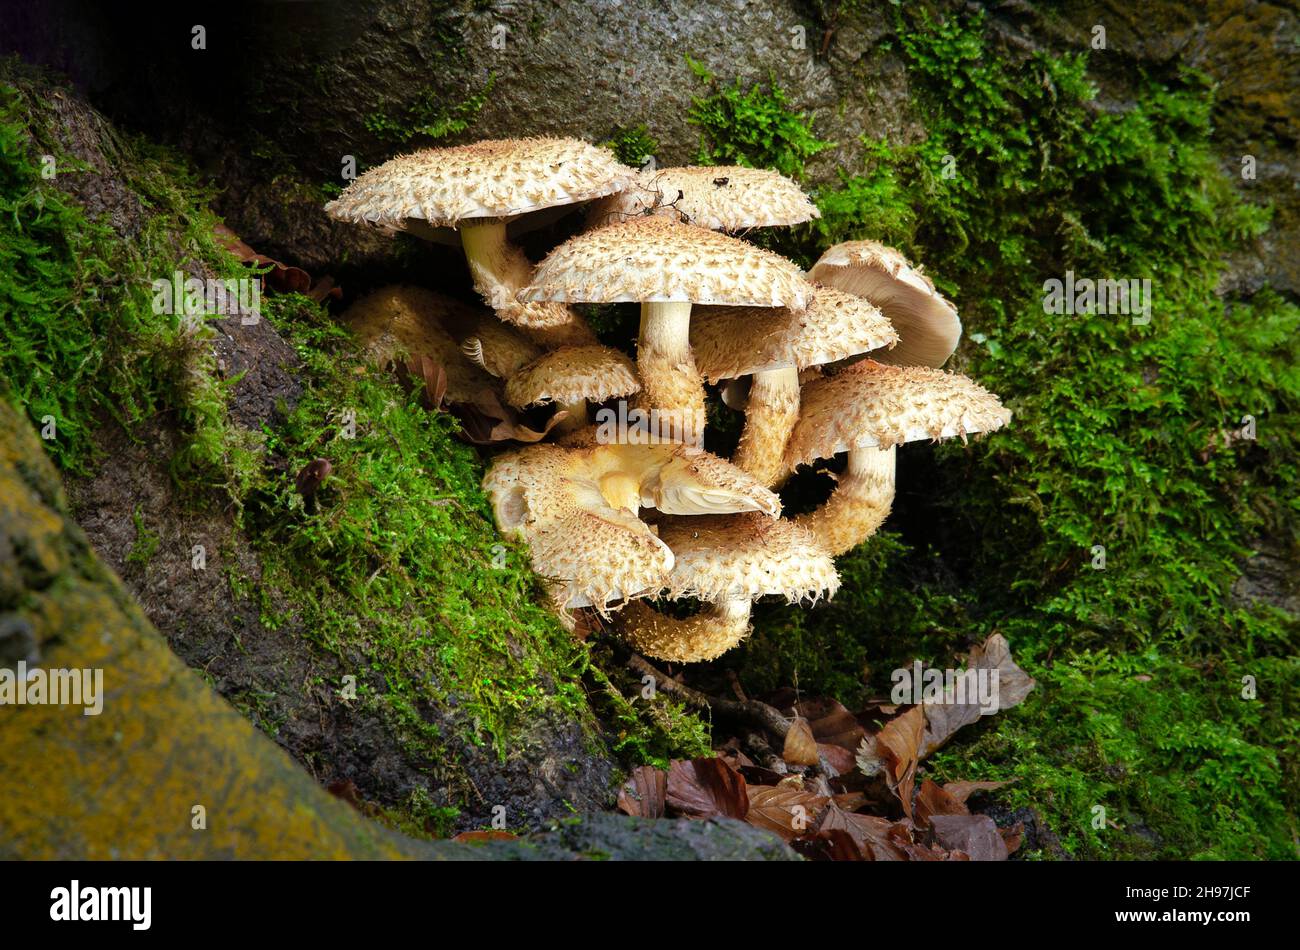 A group of mushrooms, fungi, growing out of a tree and surrounded by lichen Stock Photo